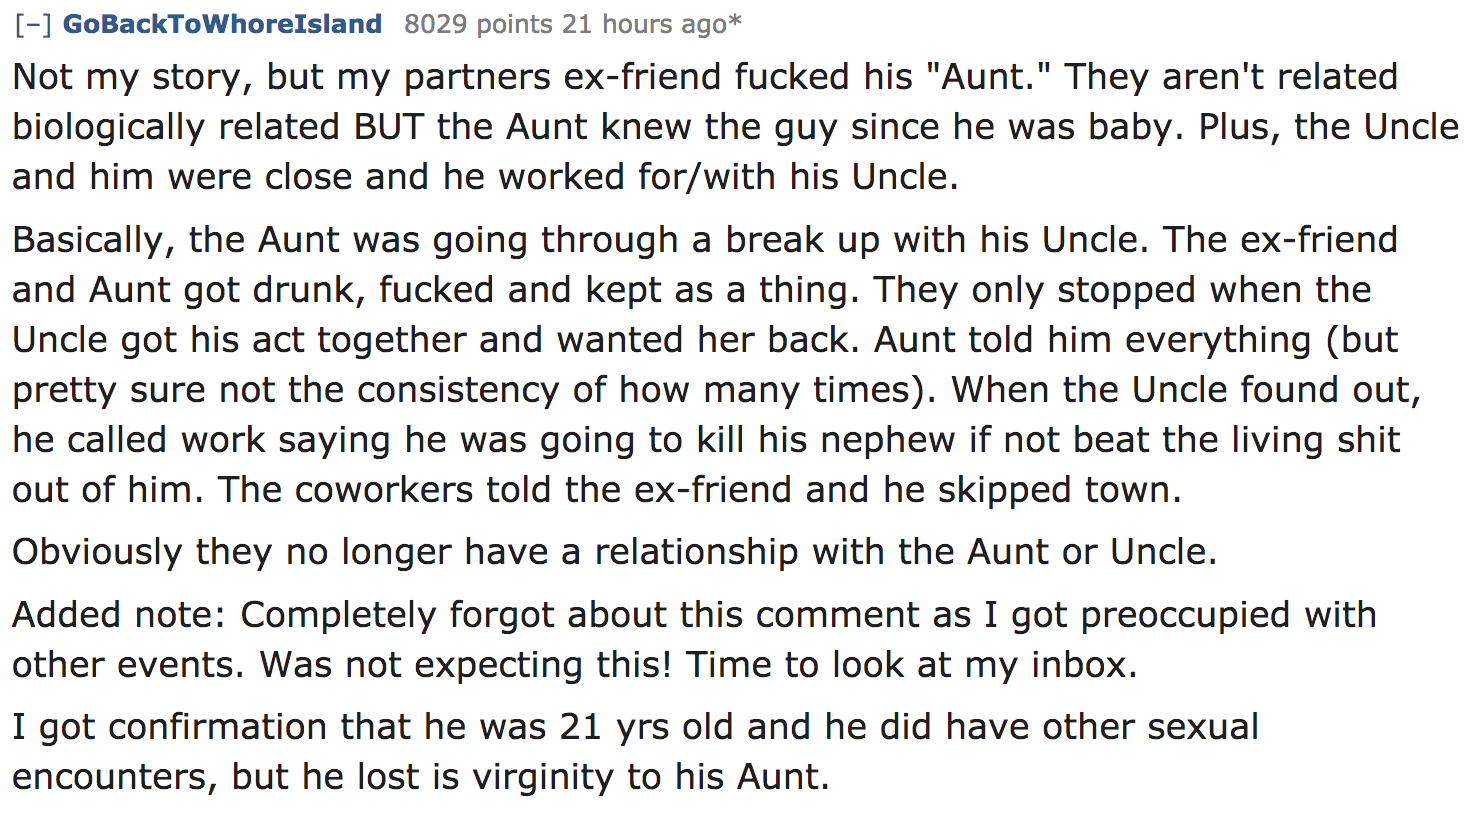 ask reddit - Not my story, but my partners exfriend fucked his